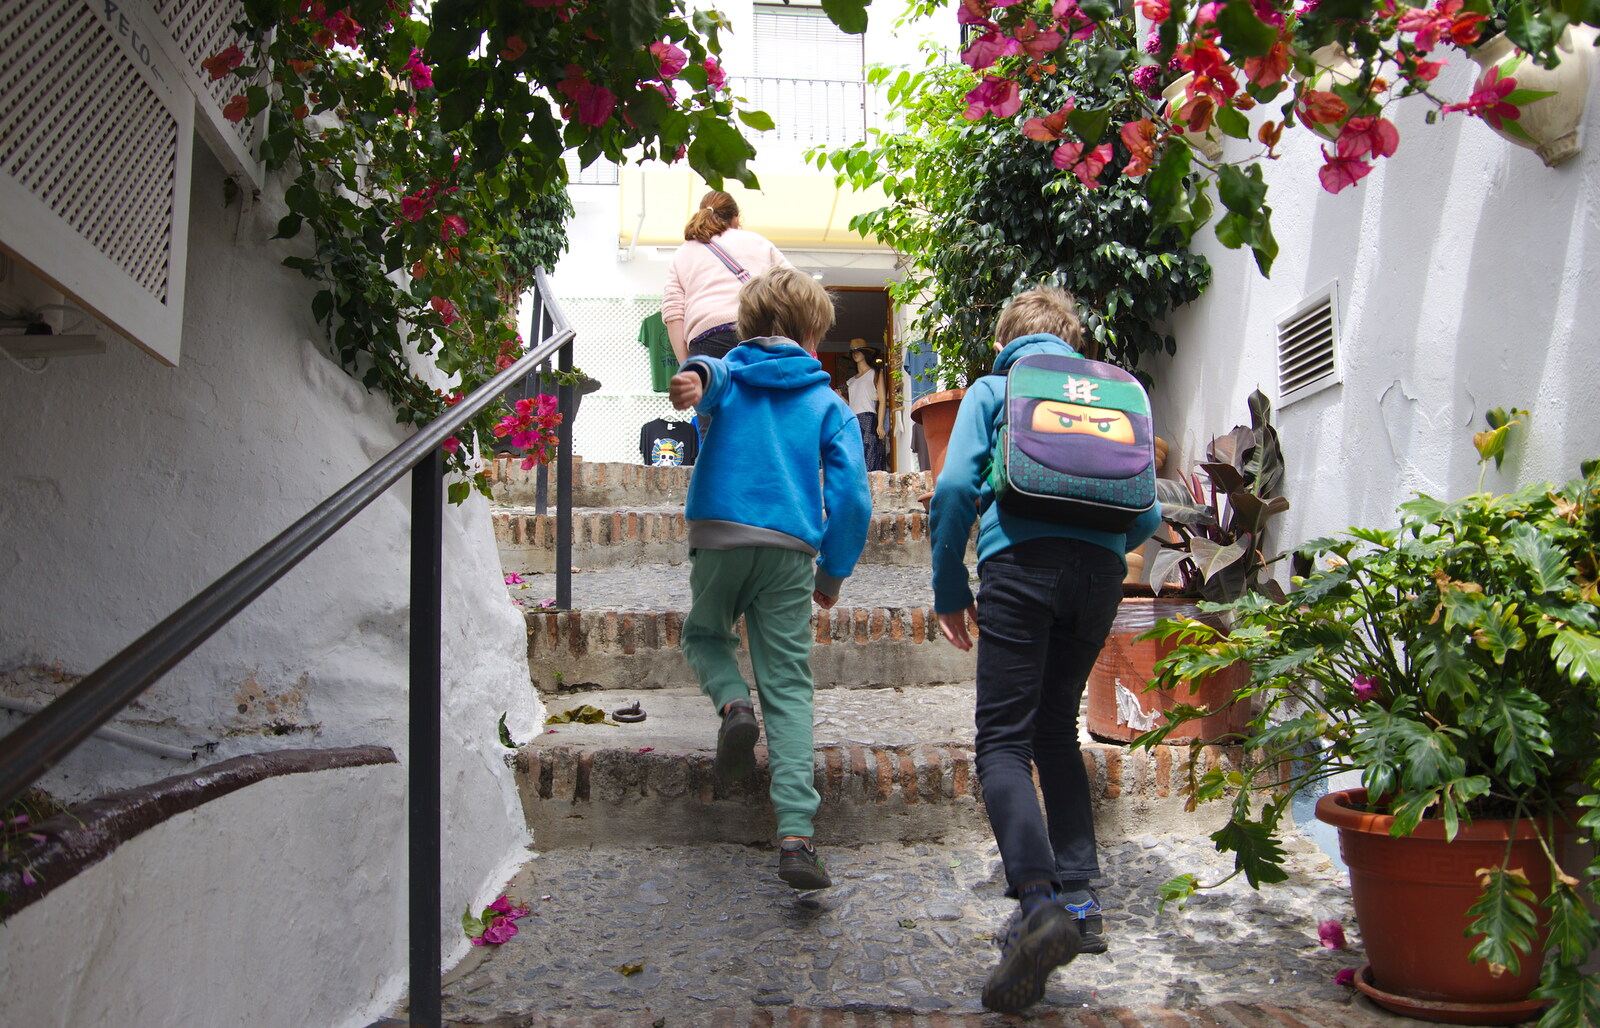 Climbing up steps soon becomes a bit of a 'thing' from The Caves of Nerja, and Frigiliana, Andalusia, Spain - 18th April 2019